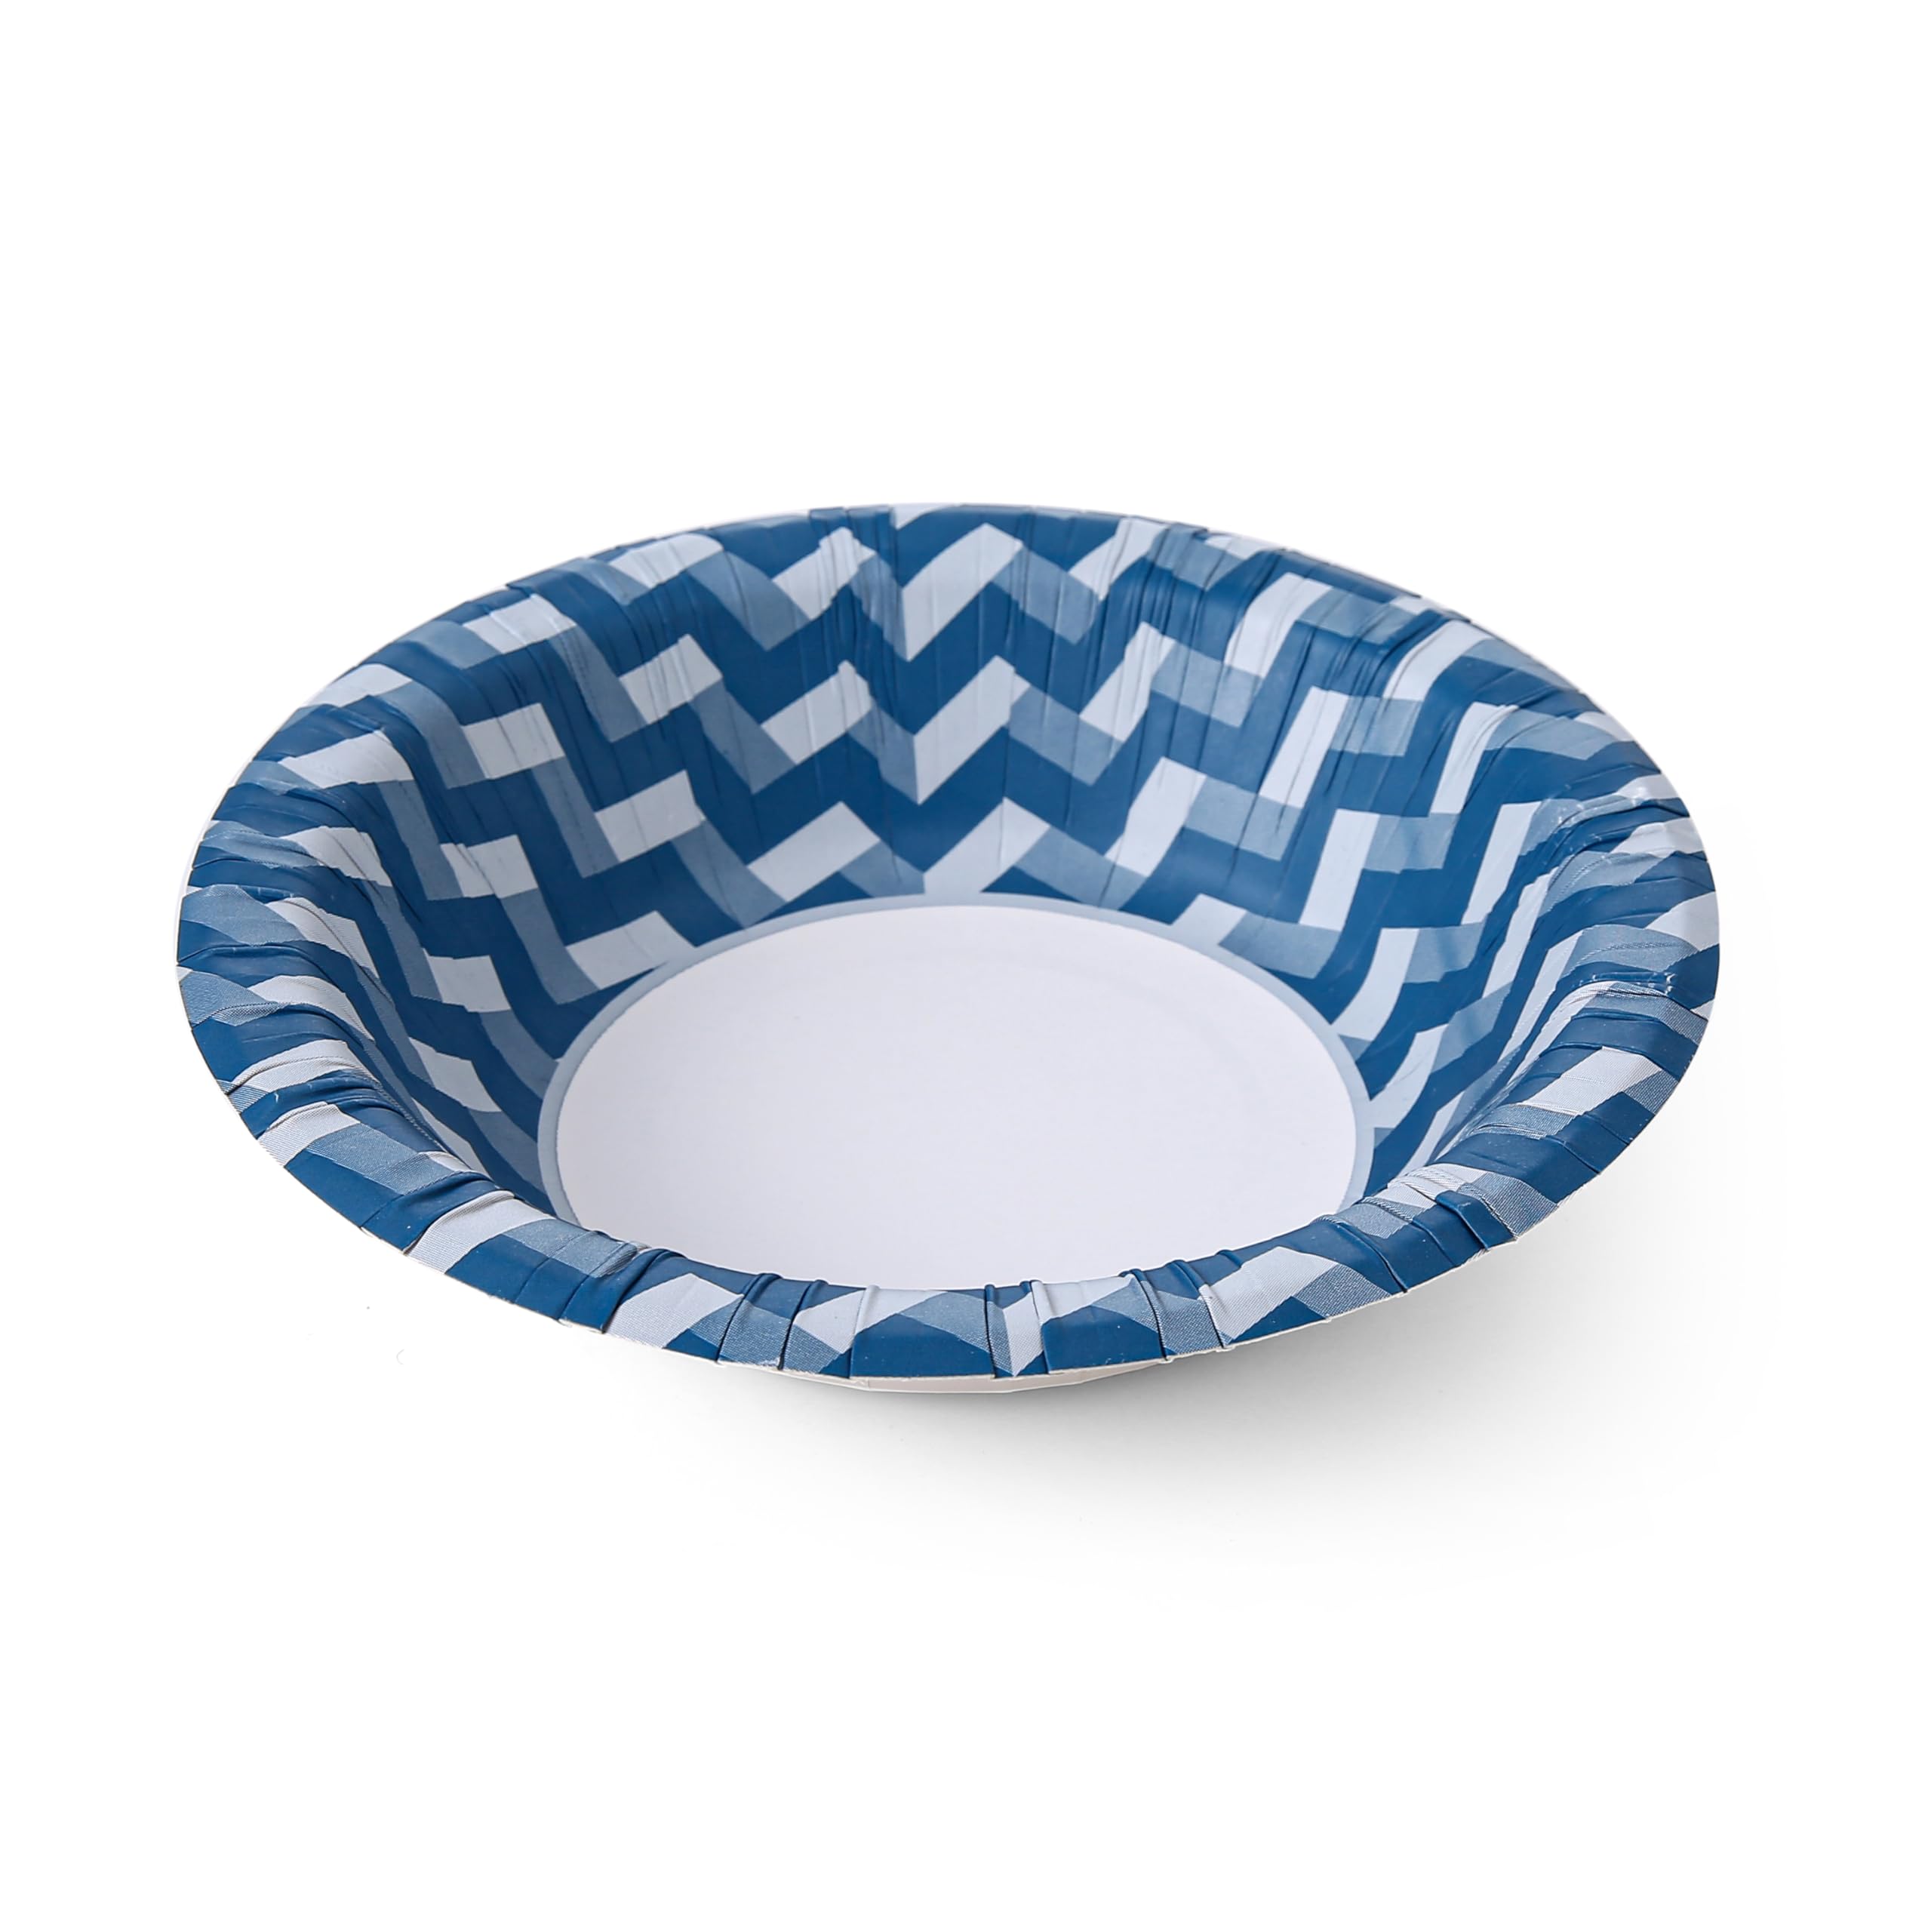 Glad Everyday Disposable Paper Bowls with Blue Weave Design - Soak-Proof, Cut-Proof, Microwaveable Paper Bowls, Spring Themed Disposable Bowls for Everyday Use | 16 Ounces, 44 Count